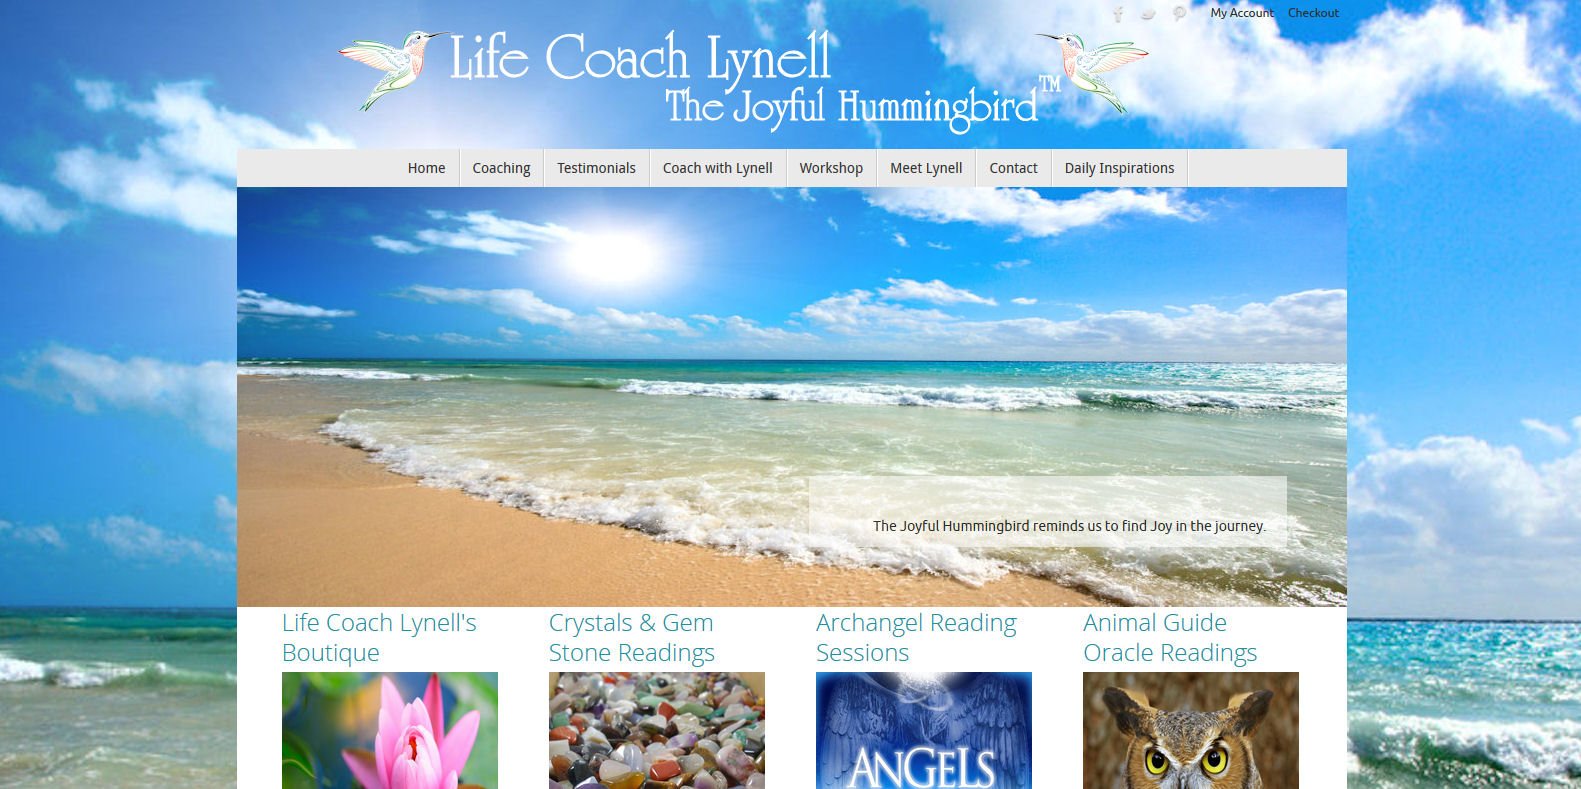 Life Coach Lynell